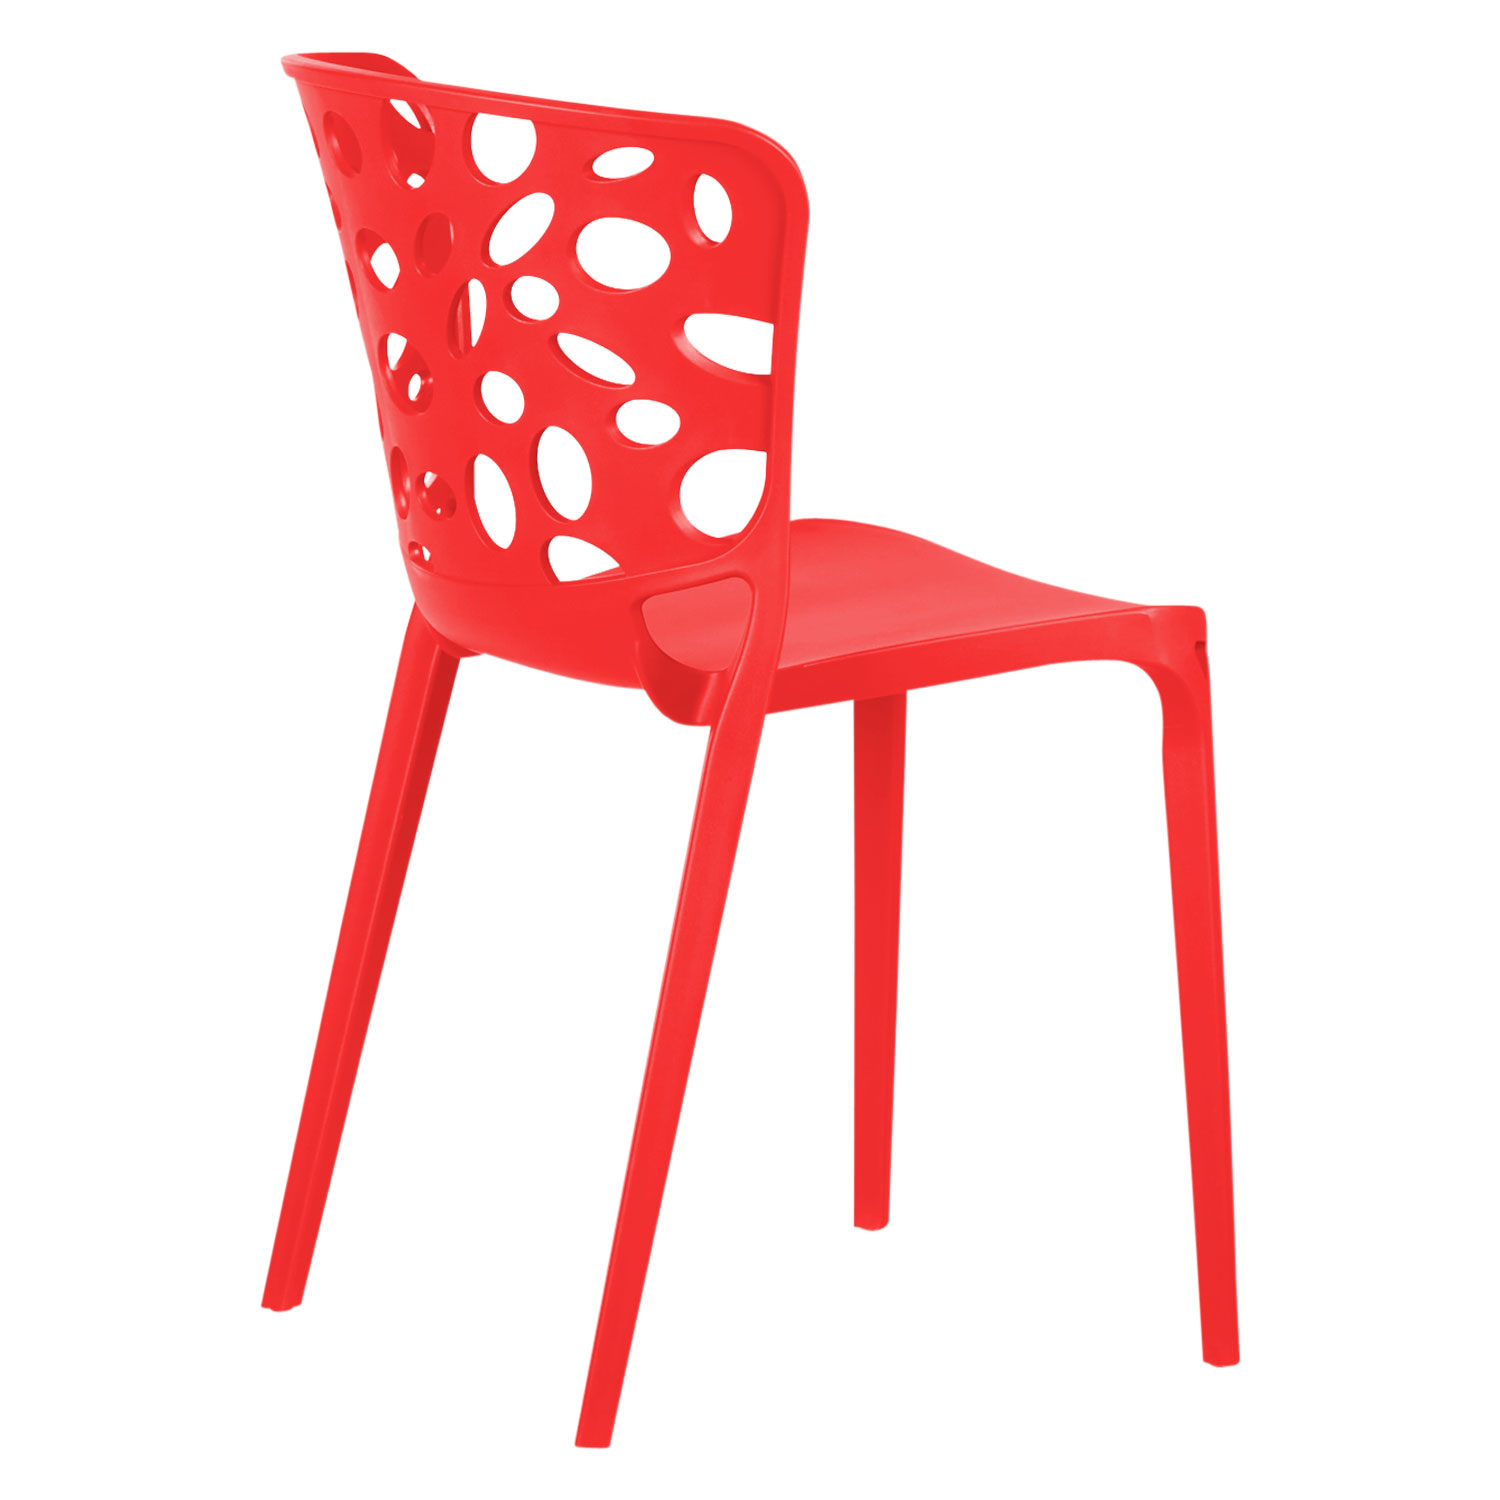 Garden chair Set of 4 Modern Red Camping chairs Outdoor chairs Plastic Stacking chairs Kitchen chairs